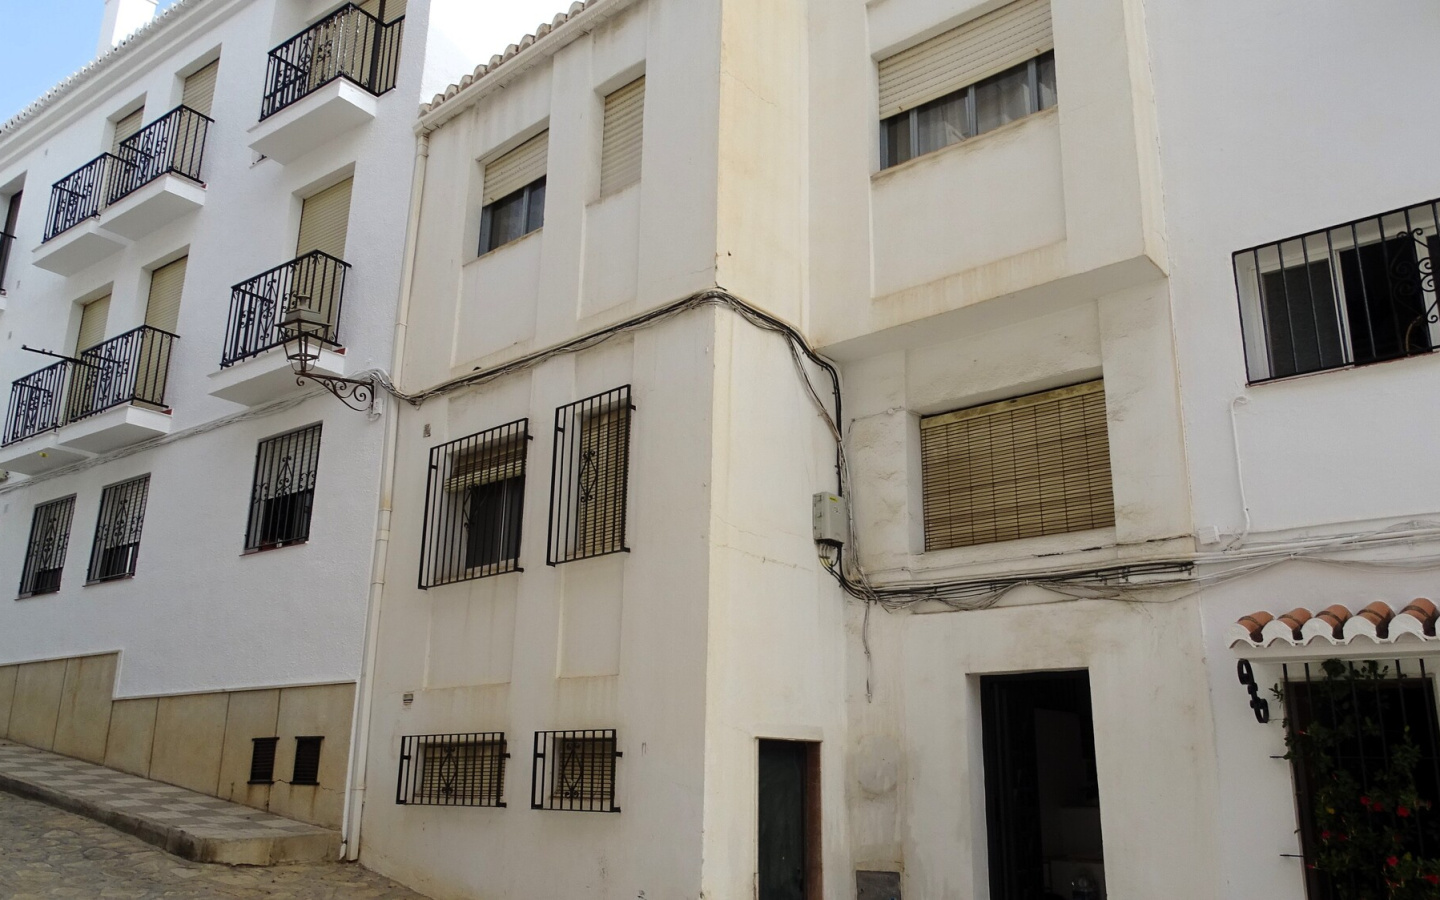 Salobreña. Town house with four bedroom, terrace and business premises